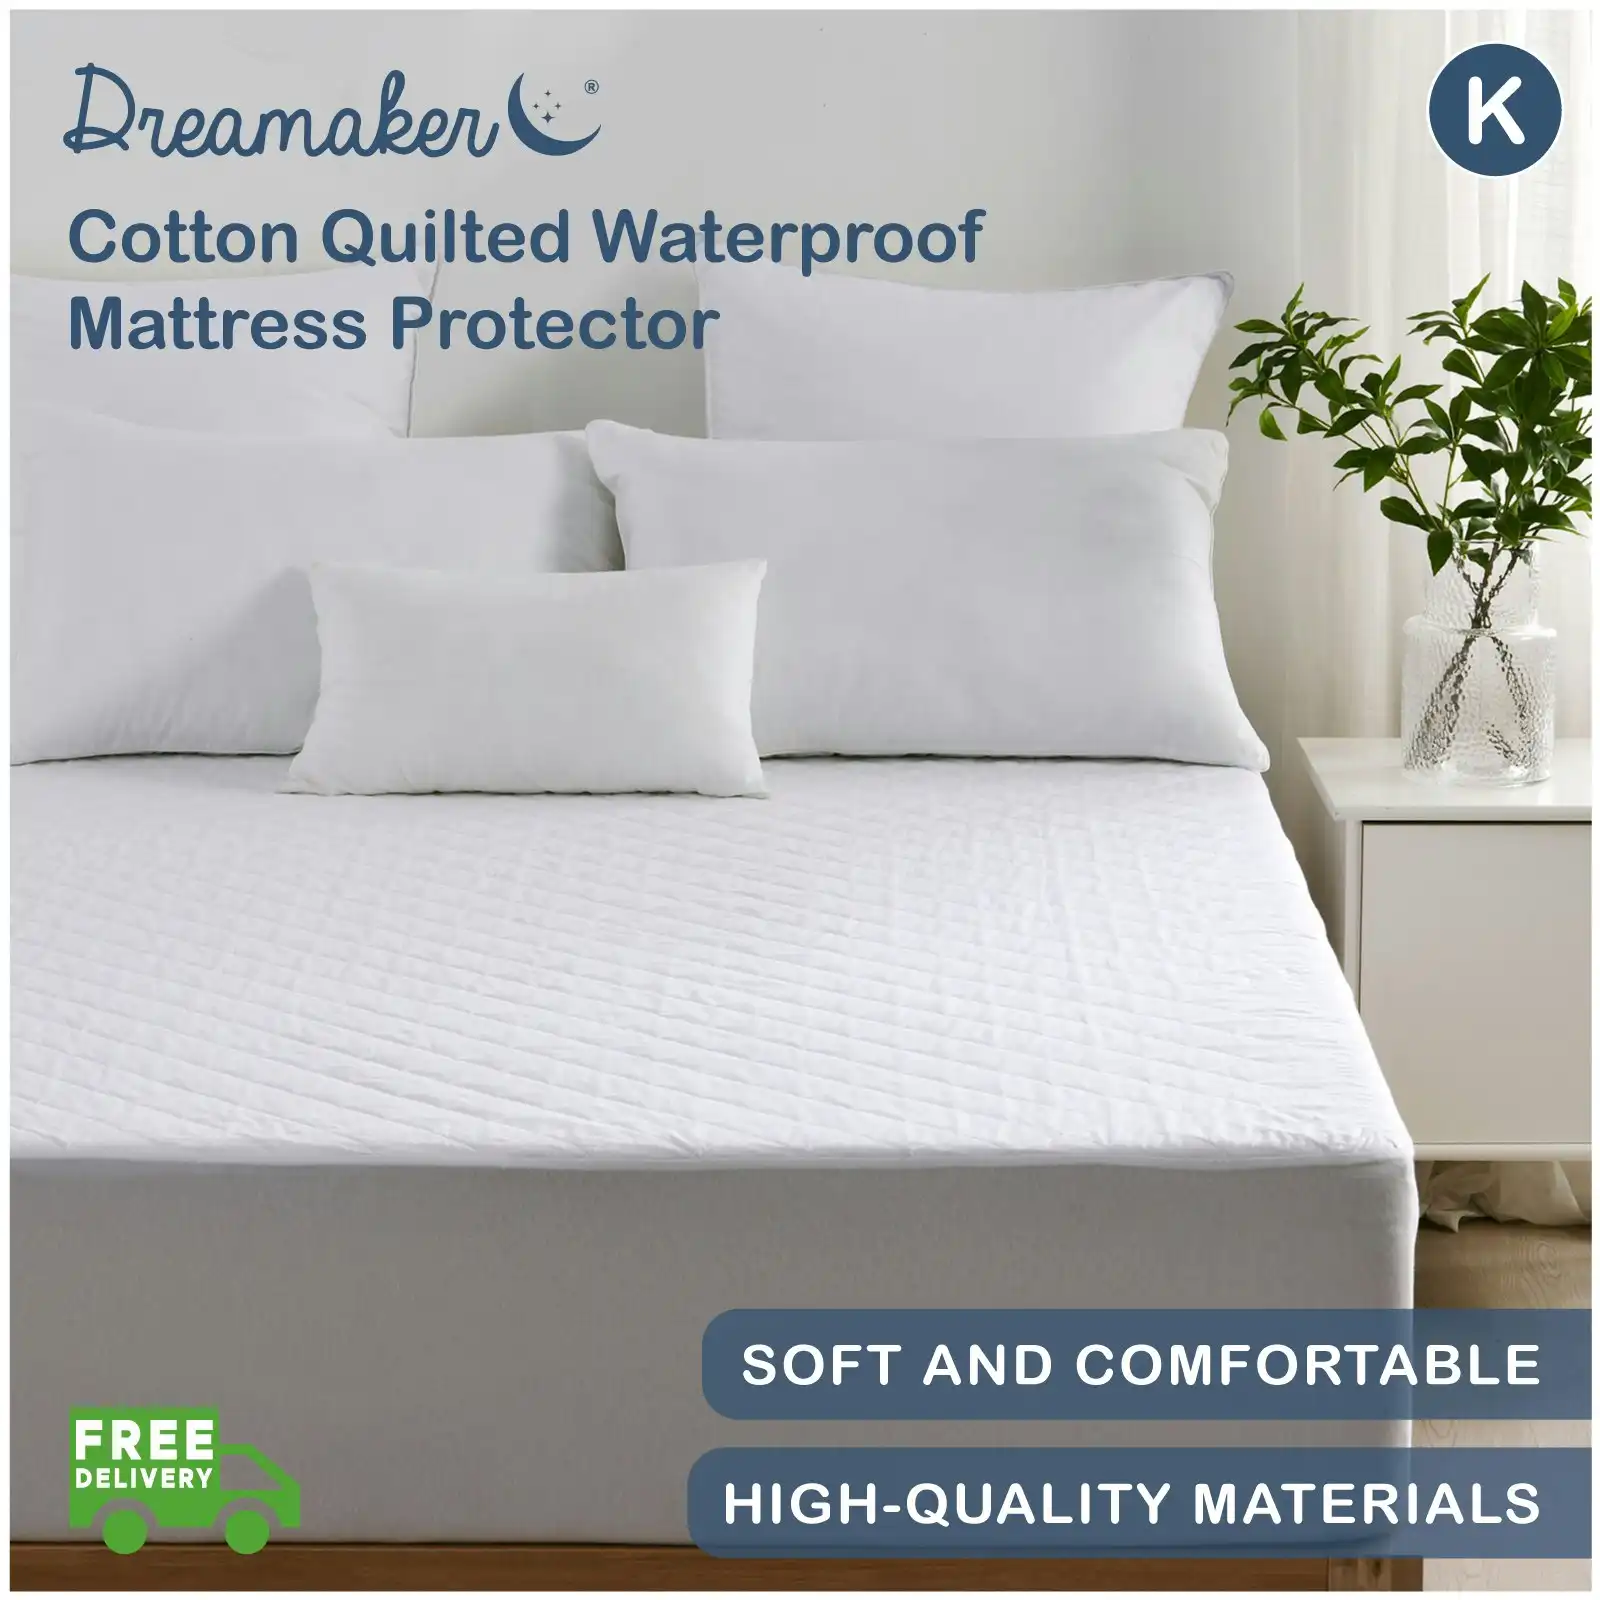 9009459 Cotton Quilted Waterproof Mattress Protector KB